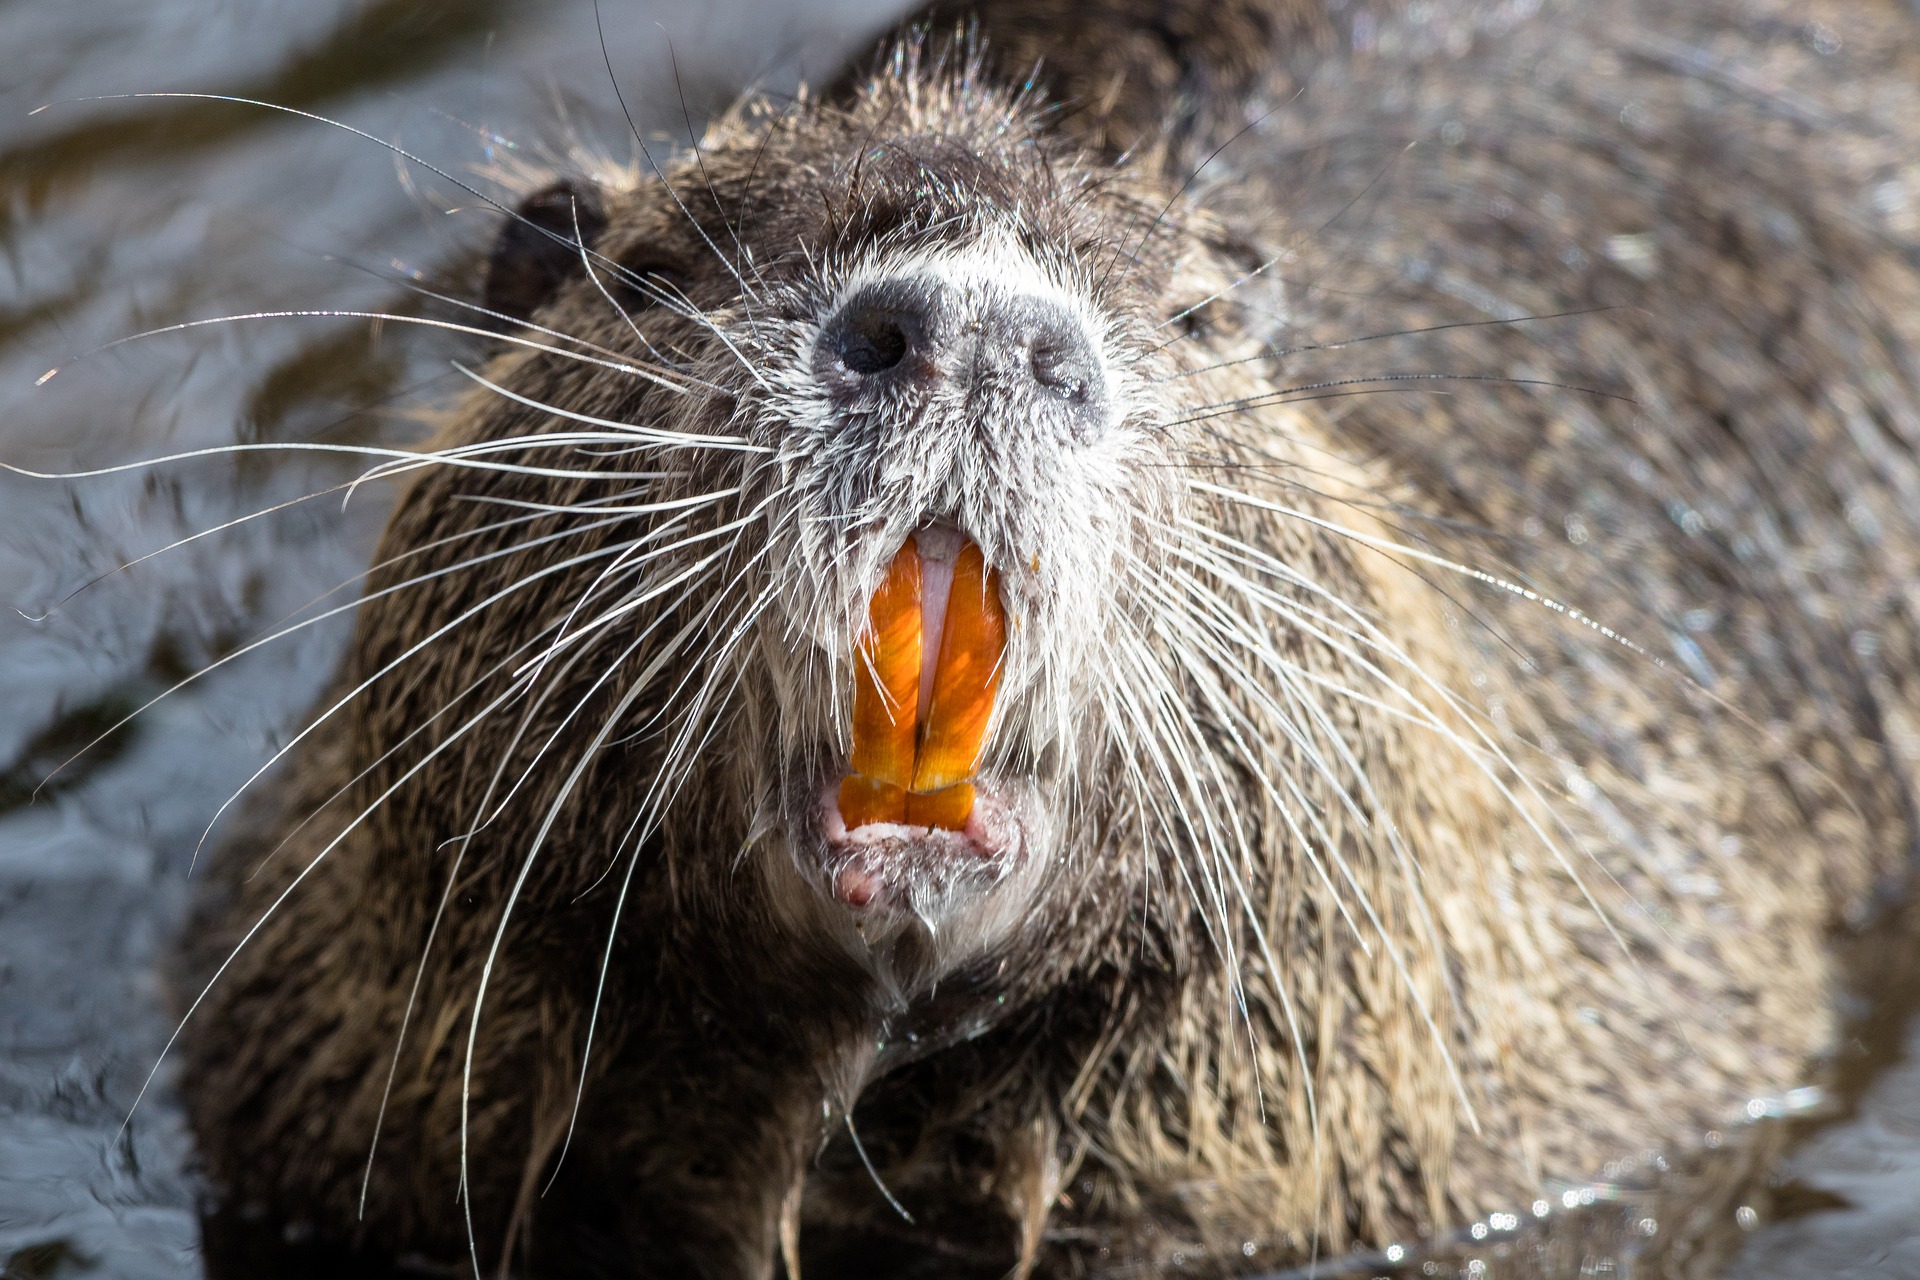 Nutria is an invasive animal that can be turned into dog treats.